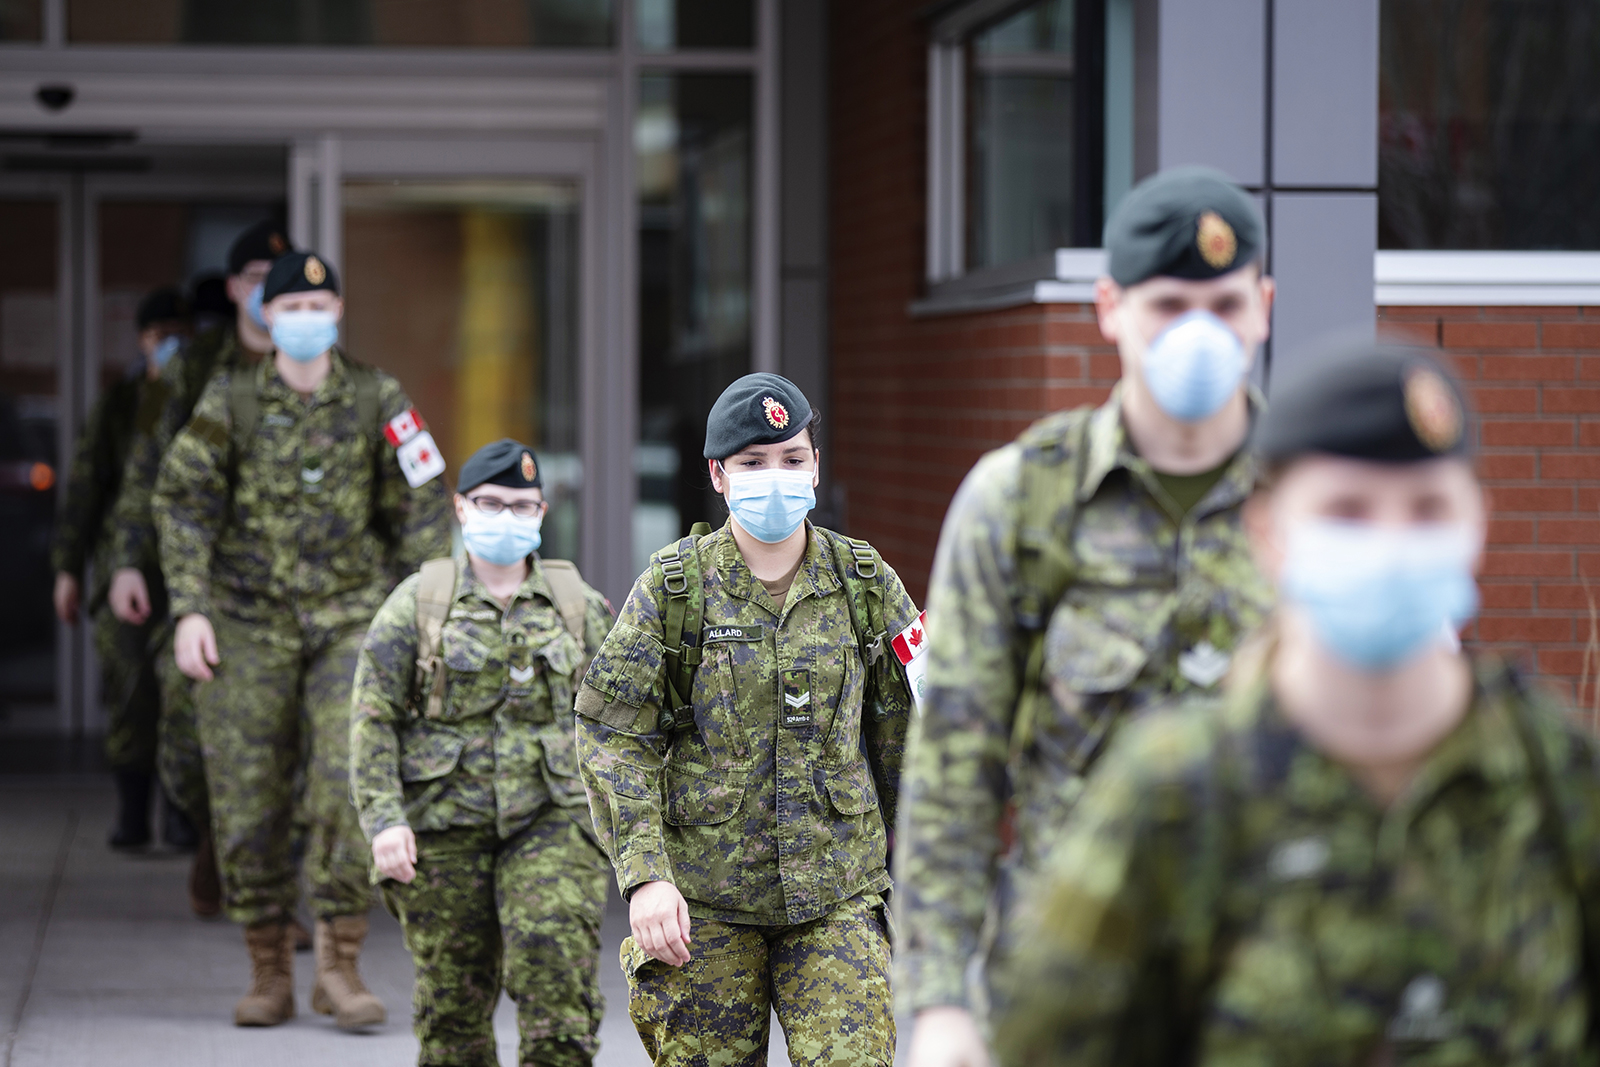 Canadian Armed Forces (CAF) medical personnel leave following their shift at the Centre Valeo St. Lambert seniors' long-term care home in St. Lambert, Quebec, Canada, on April 24.